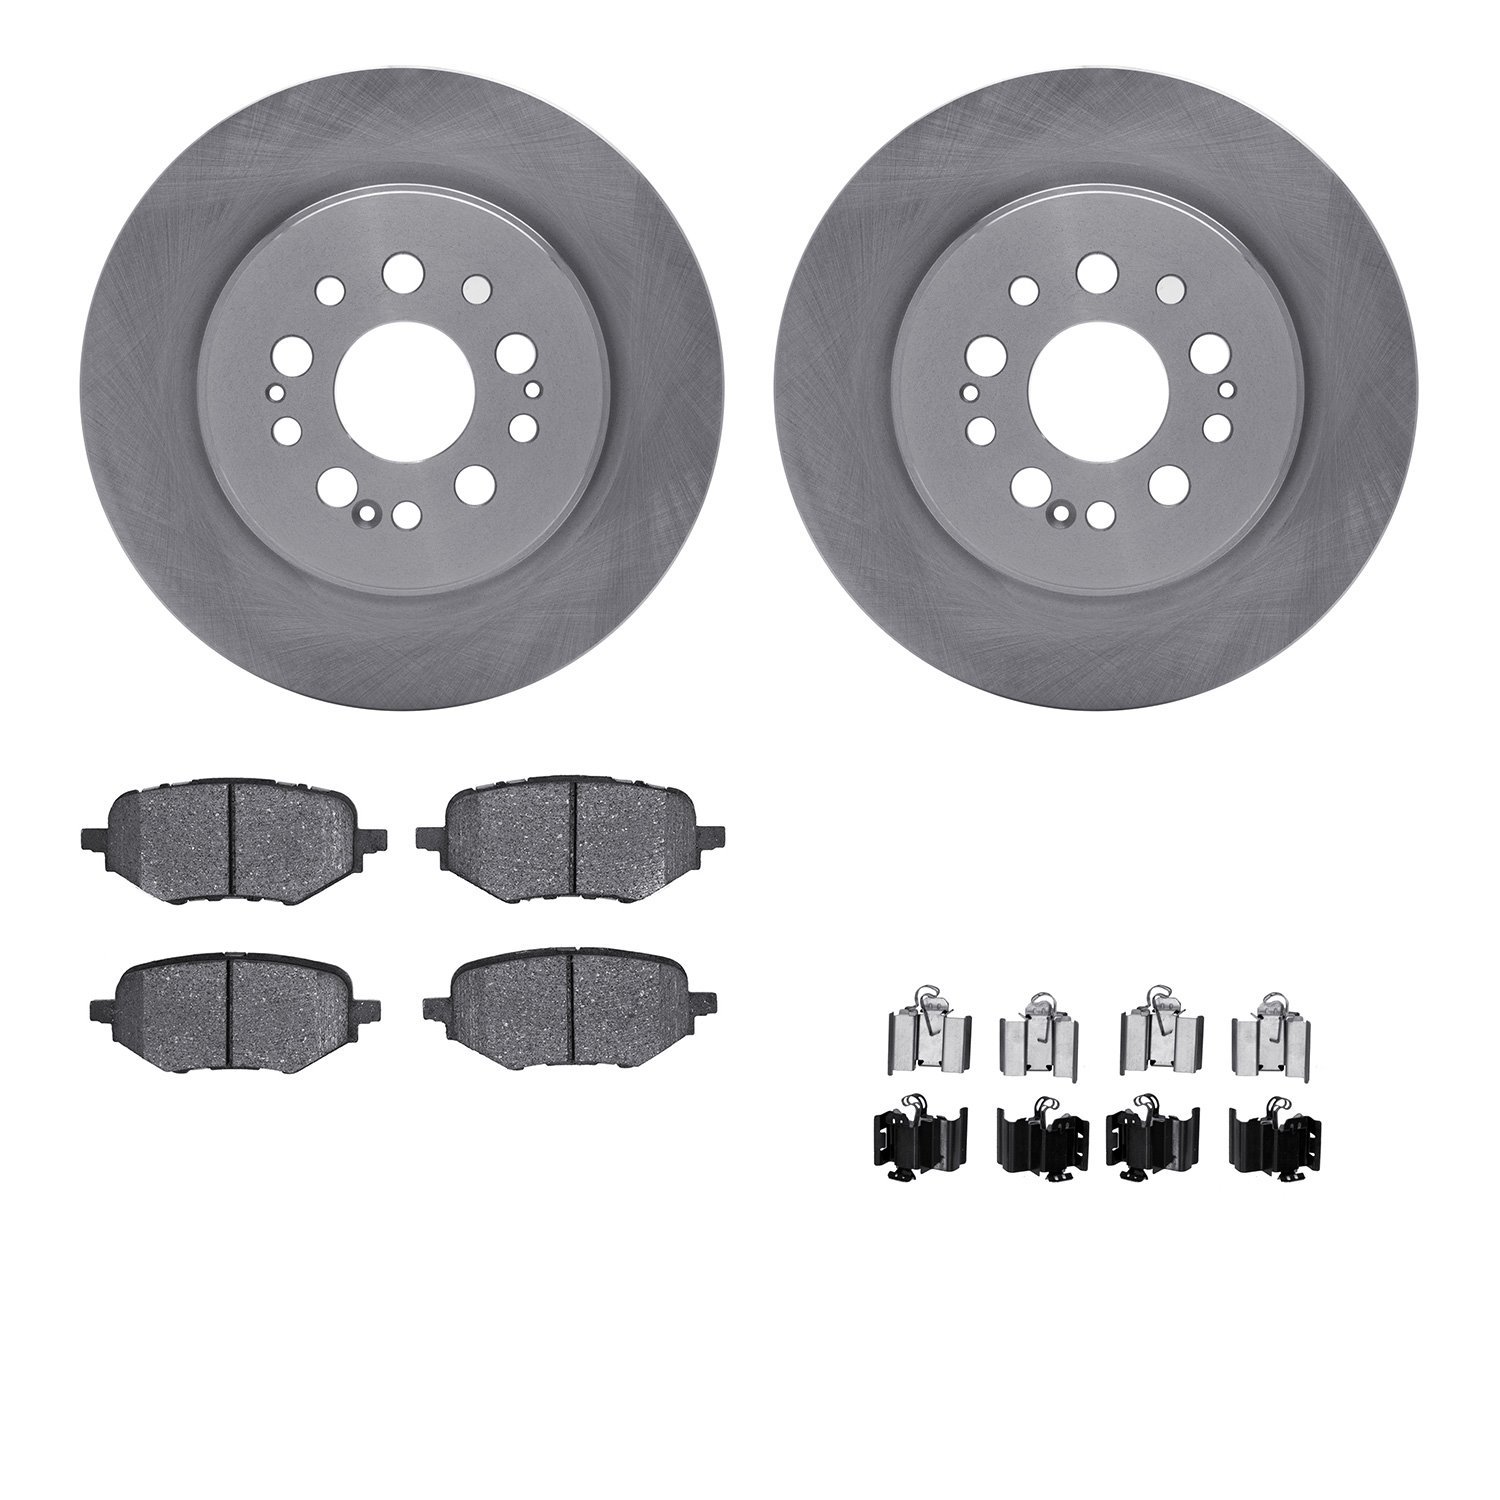 6312-59116 Brake Rotors with 3000-Series Ceramic Brake Pads Kit with Hardware, Fits Select Acura/Honda, Position: Rear